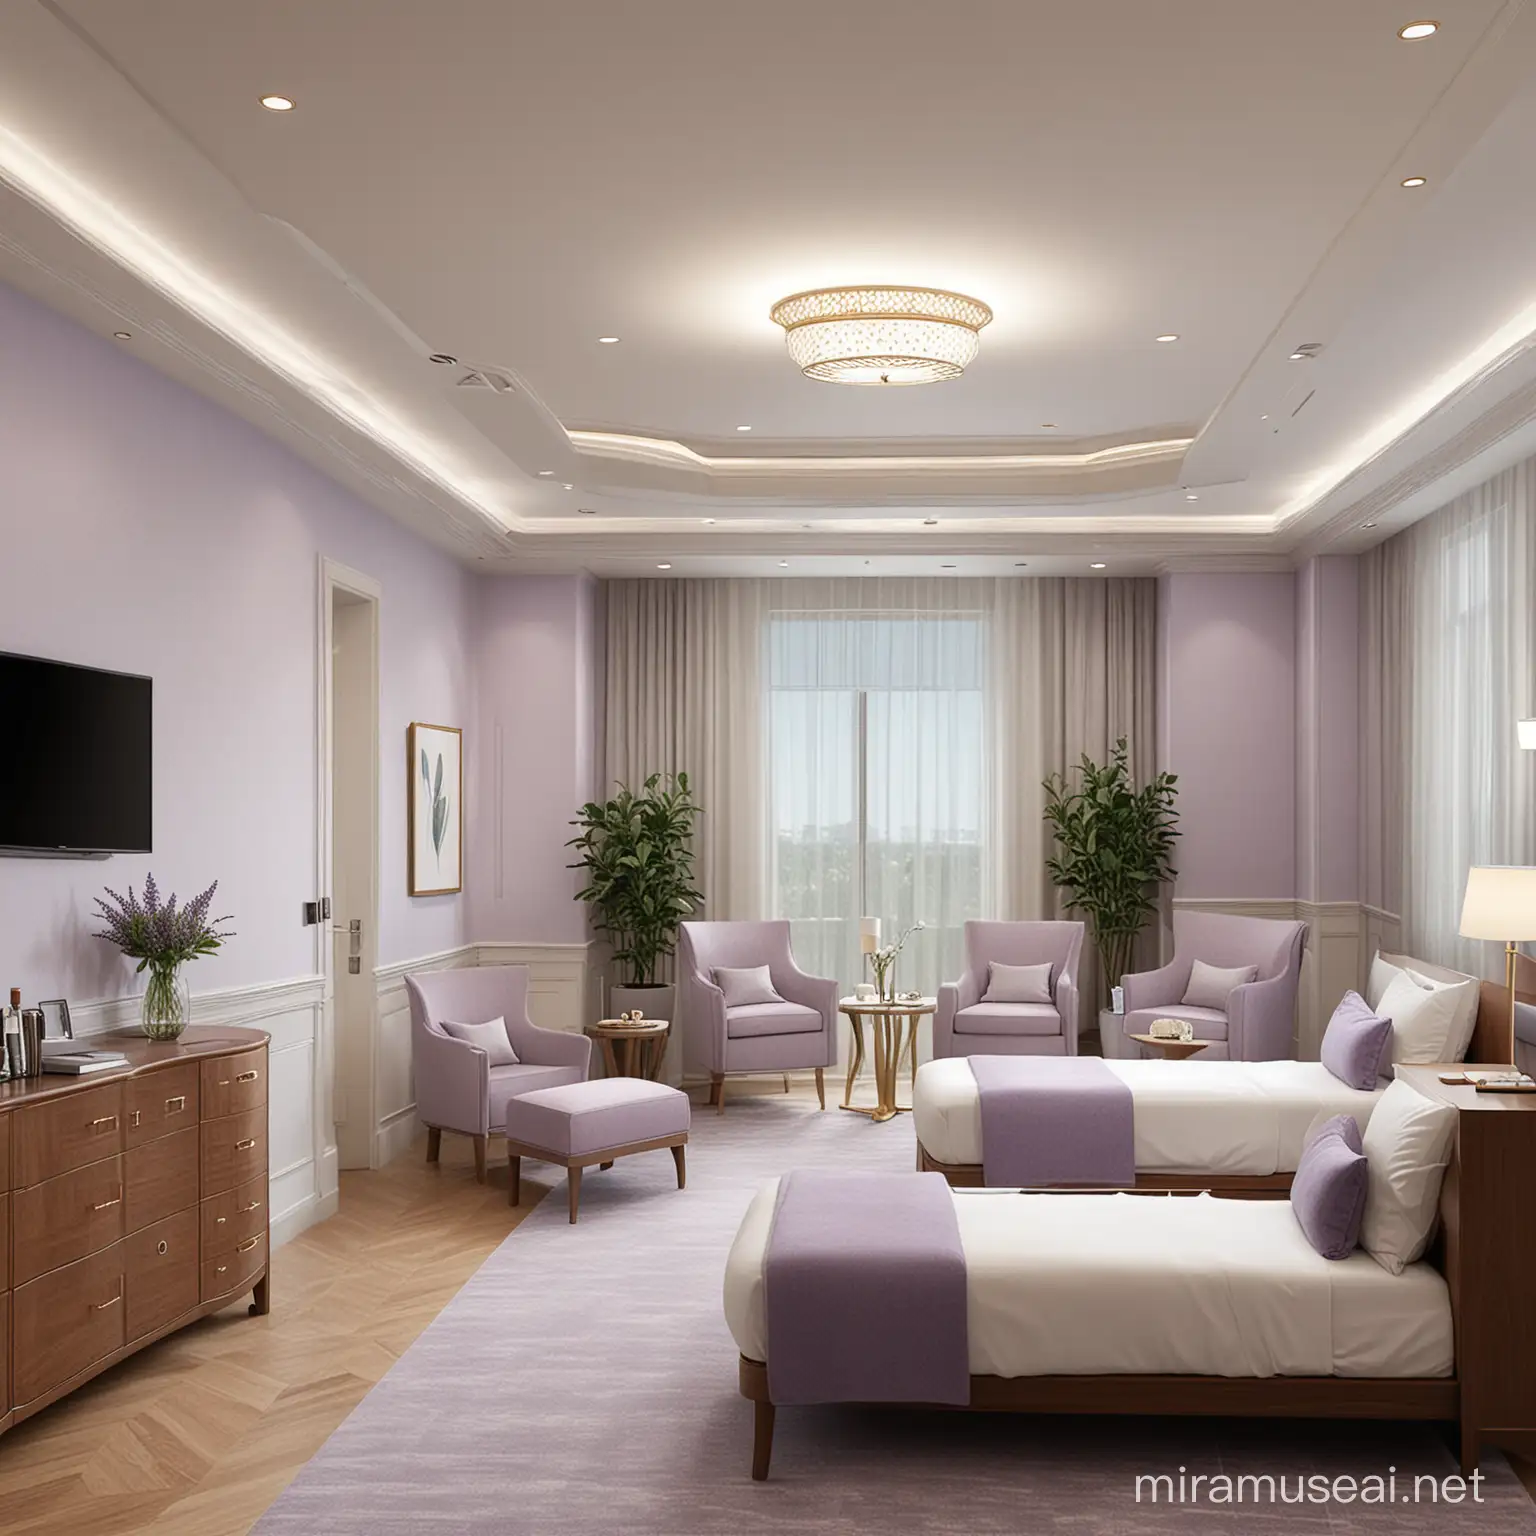 create a full interior view of private presidential suite room for a respiratory hospital ward inspired by lavender and eucalyptus 